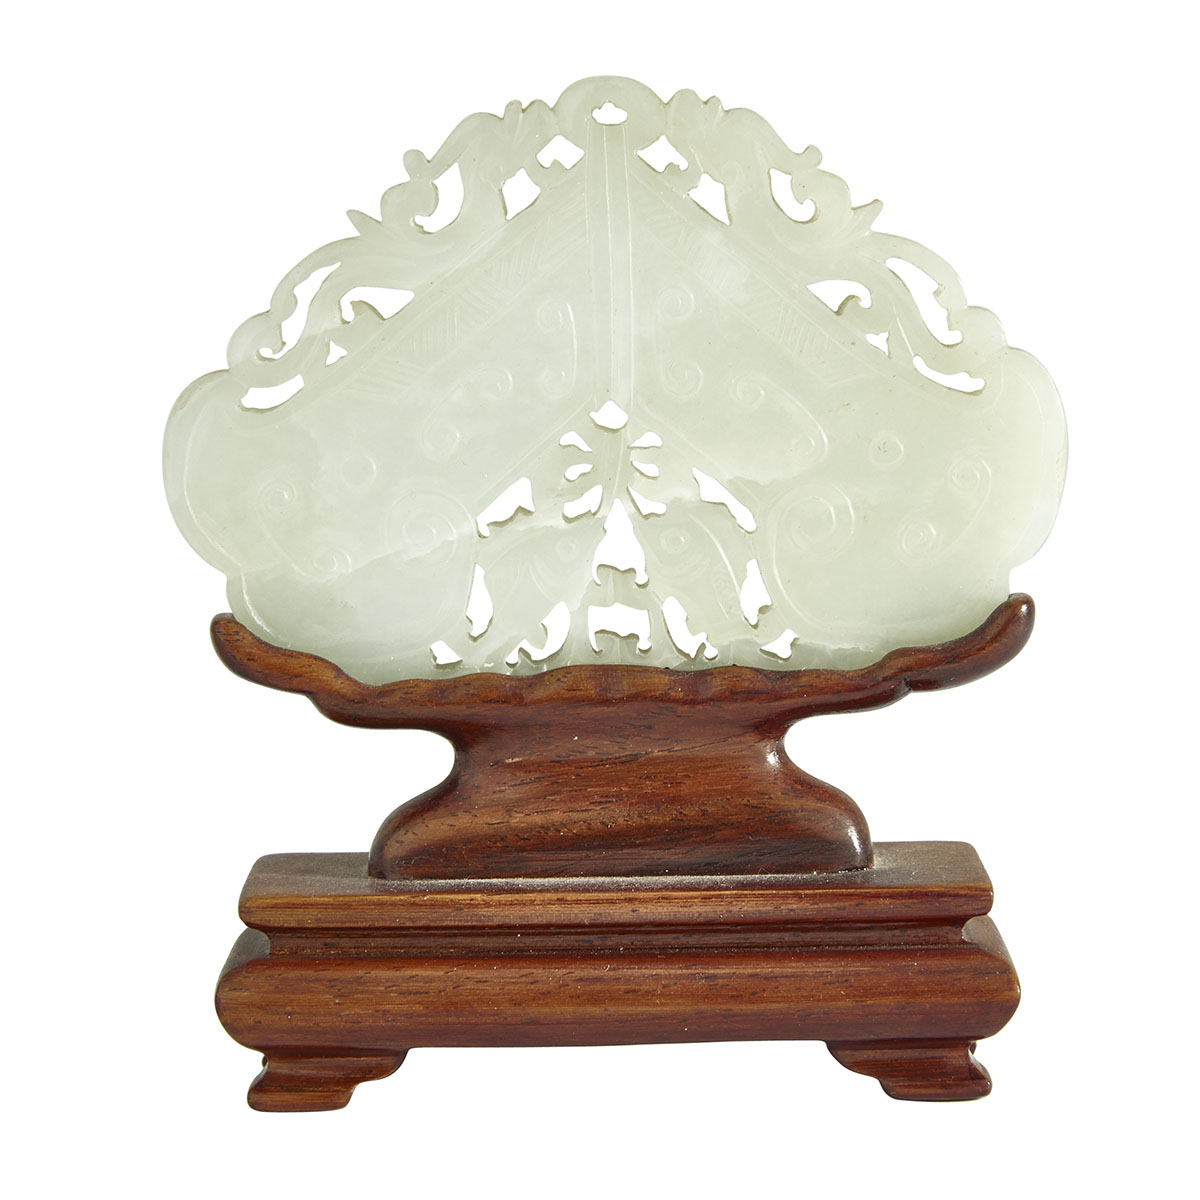 A White Jade Plaque with a Rosewood Stand, 19th Century